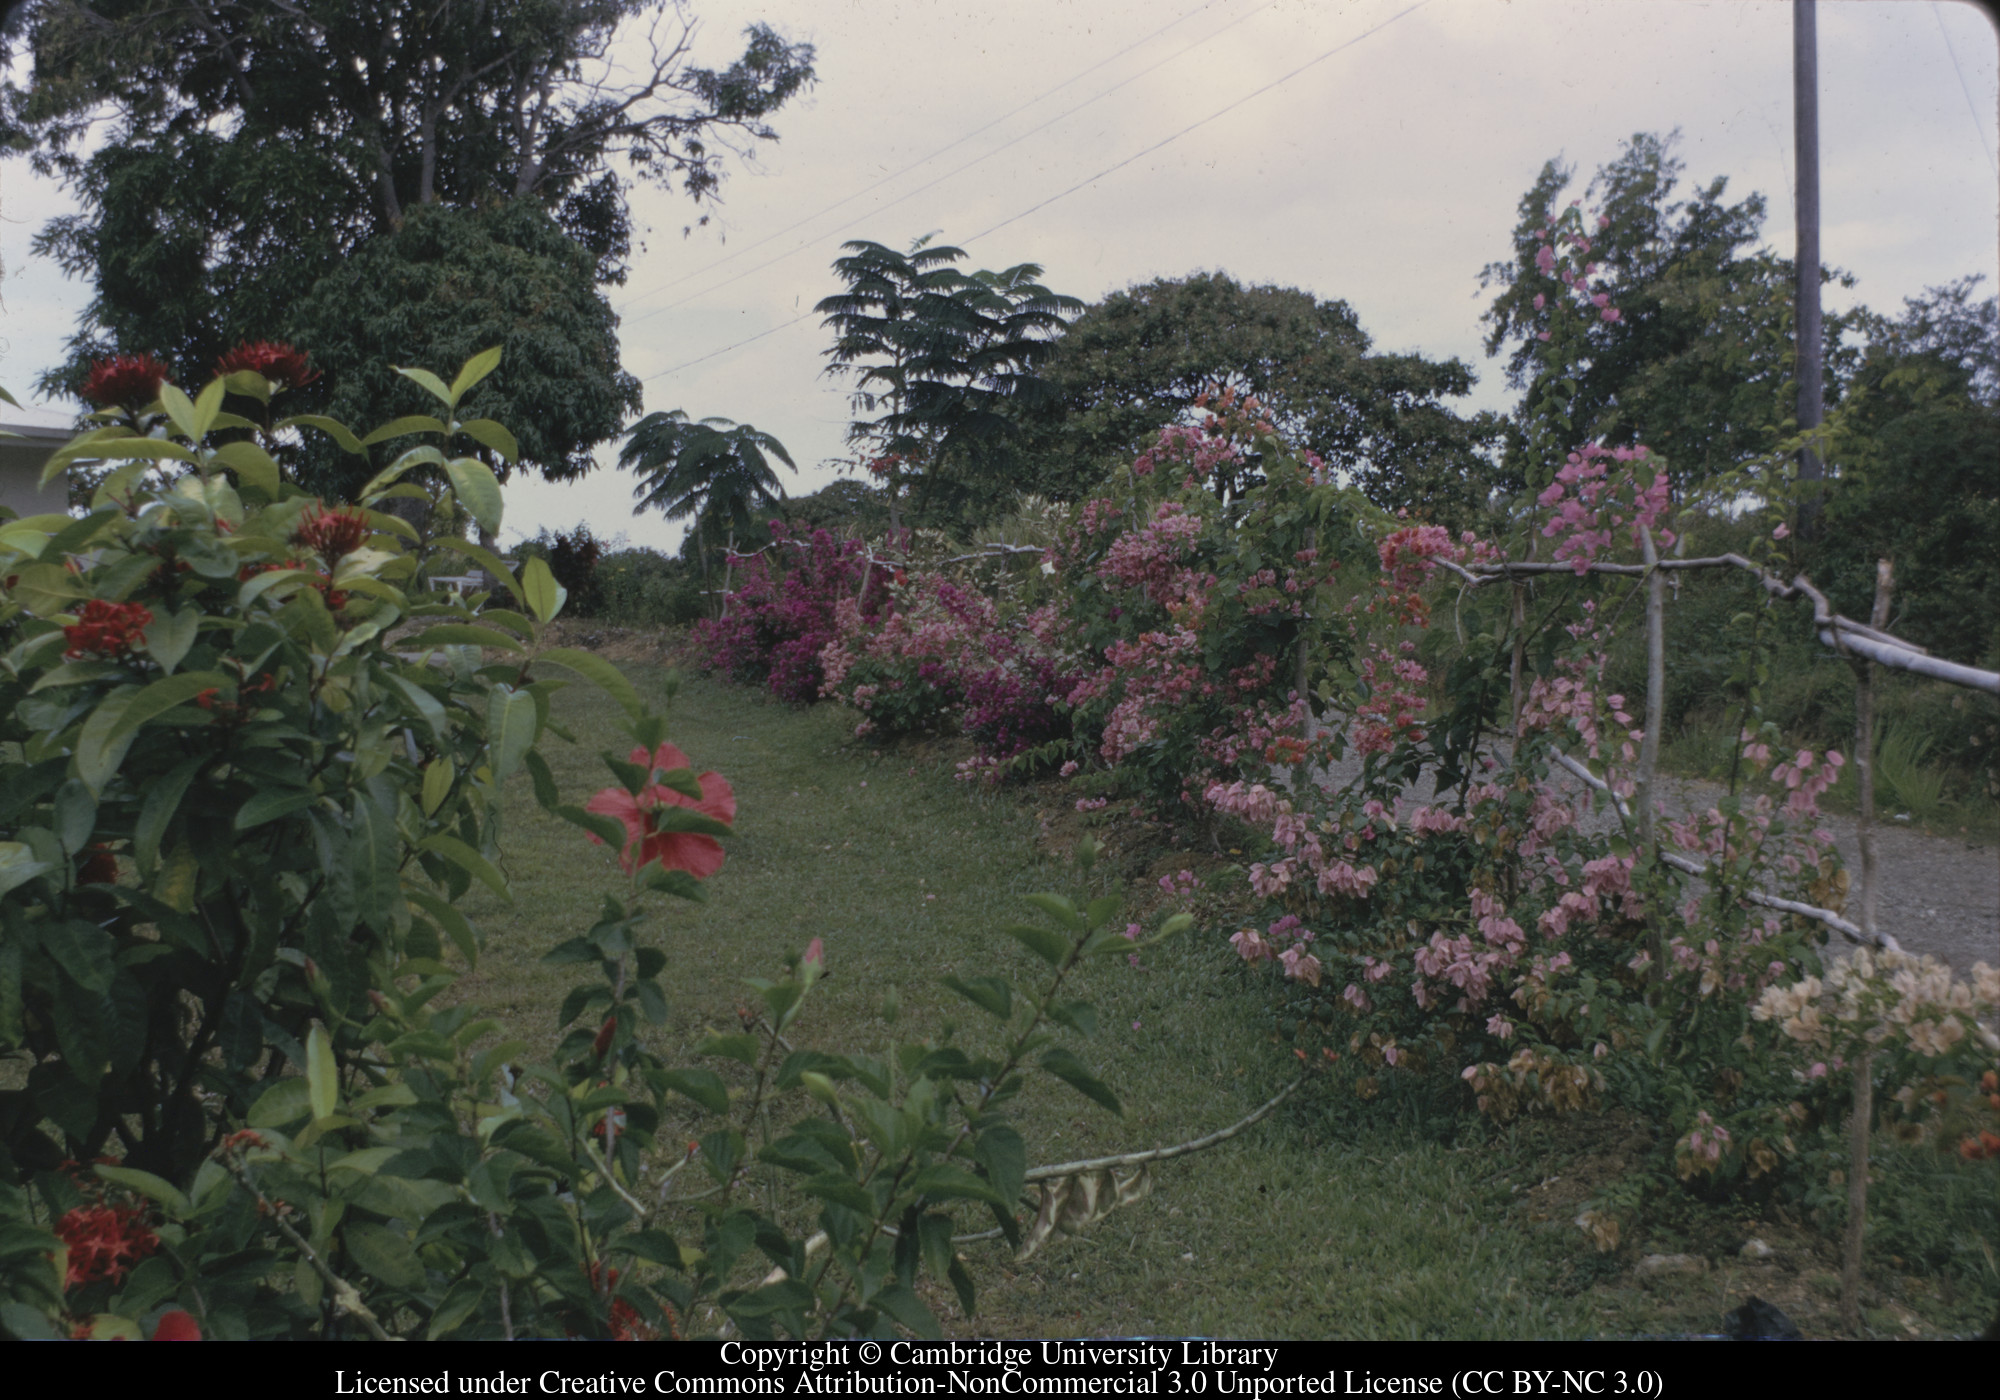 C [Ciceron] : Bougainvillea hedge along road which we planted, 1972-09